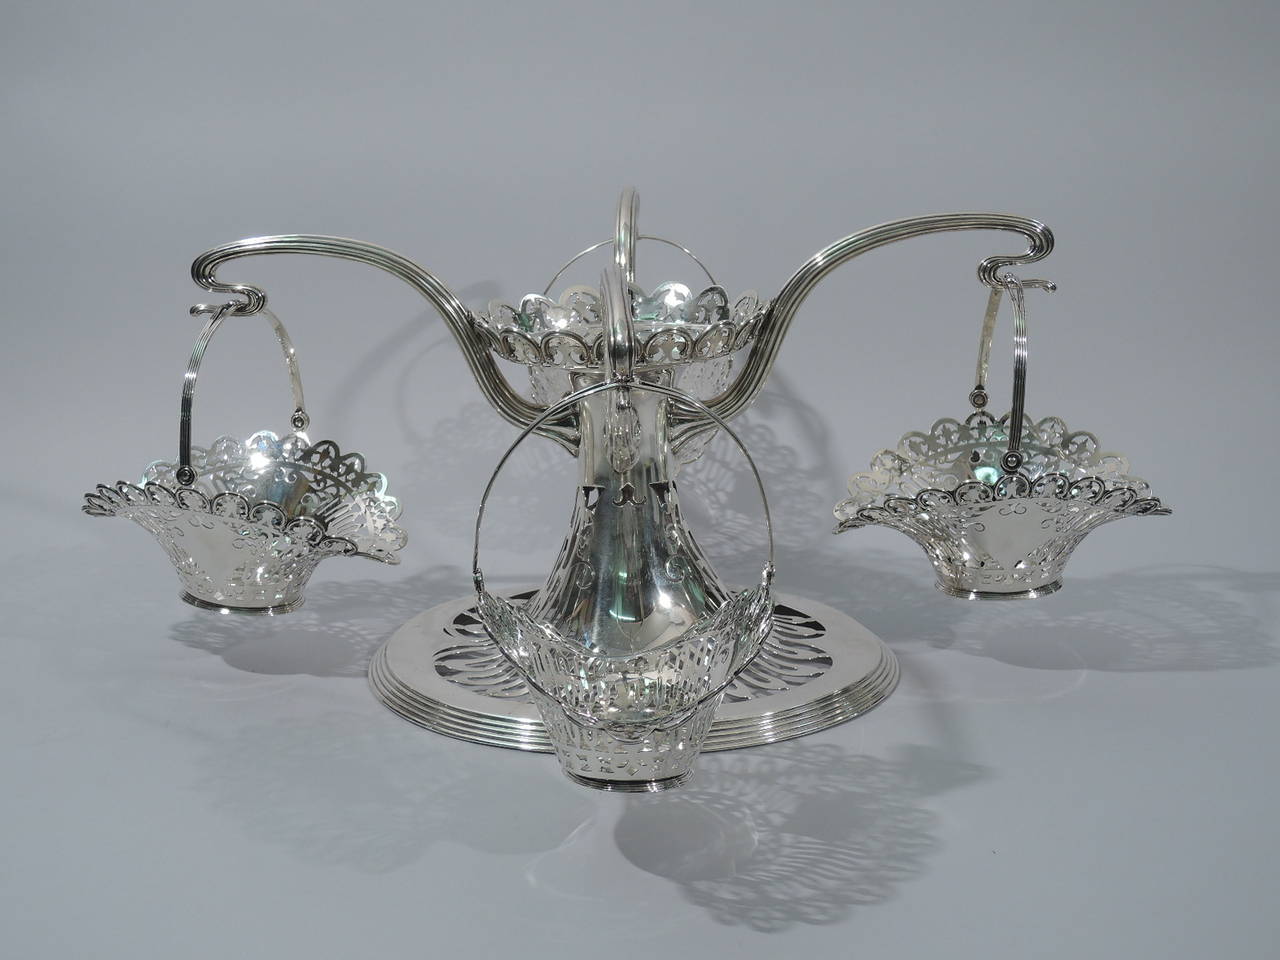 Edwardian Beautiful Bailey, Banks and Biddle Epergne with Pierced Baskets, circa 1910